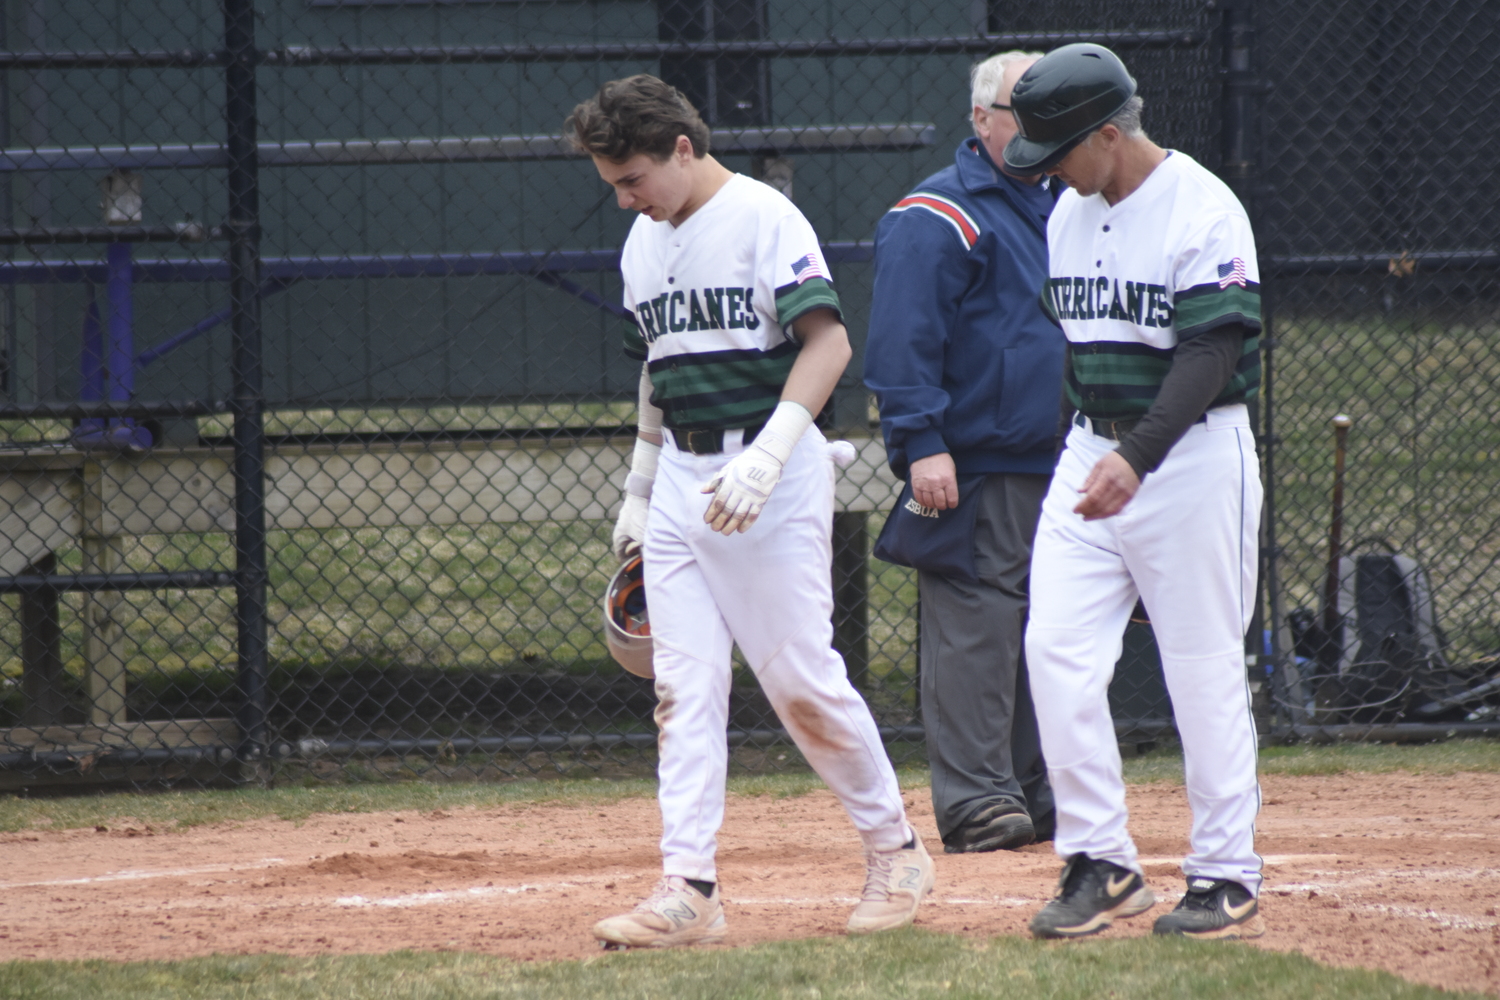 Westhampton Beach senior Ethan Seltzer tries to walk off an injury after fouling a ball hard off his foot. He stayed in the game.   DREW BUDD